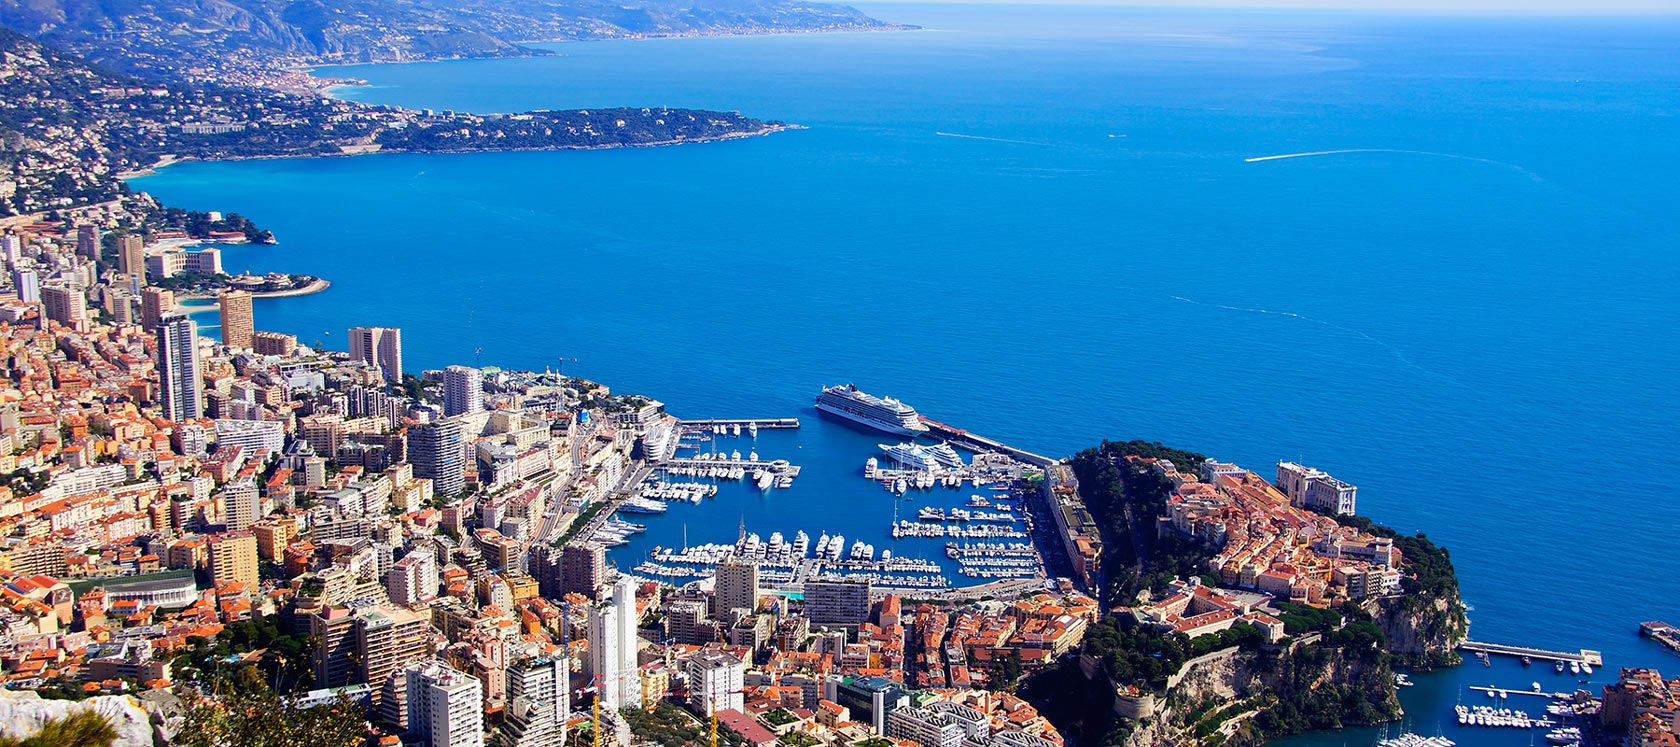 Welcome to Riviera come true, your private tour on the French Riviera ...